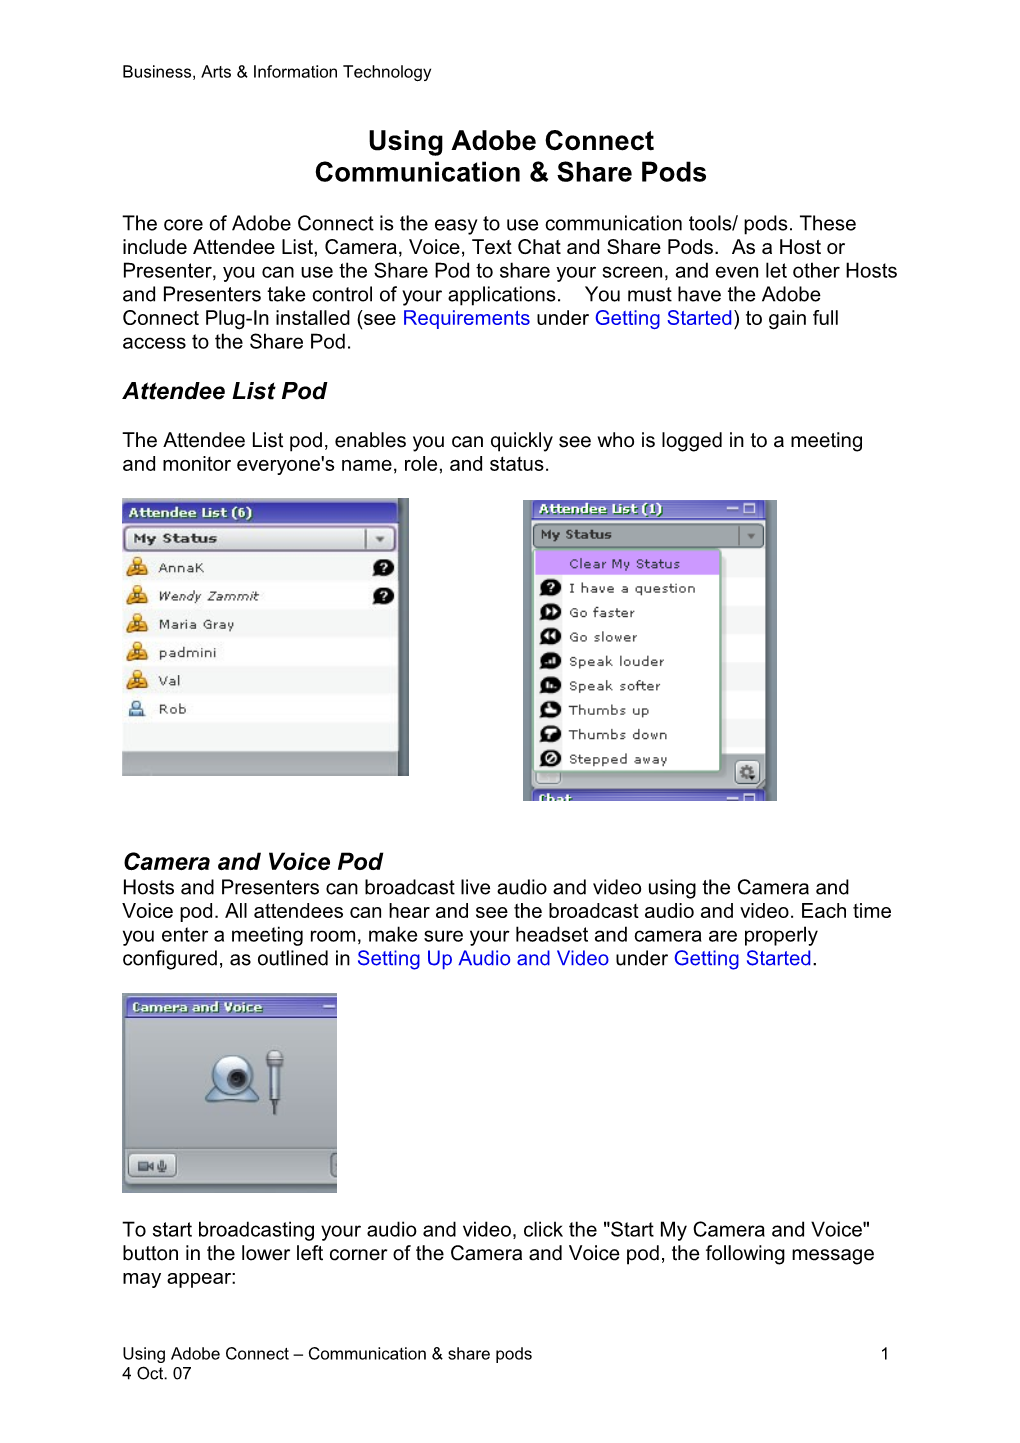 There Are Two Pods in Adobe Connect for Sharing Files: the File Sharing Pod and the Share Pod